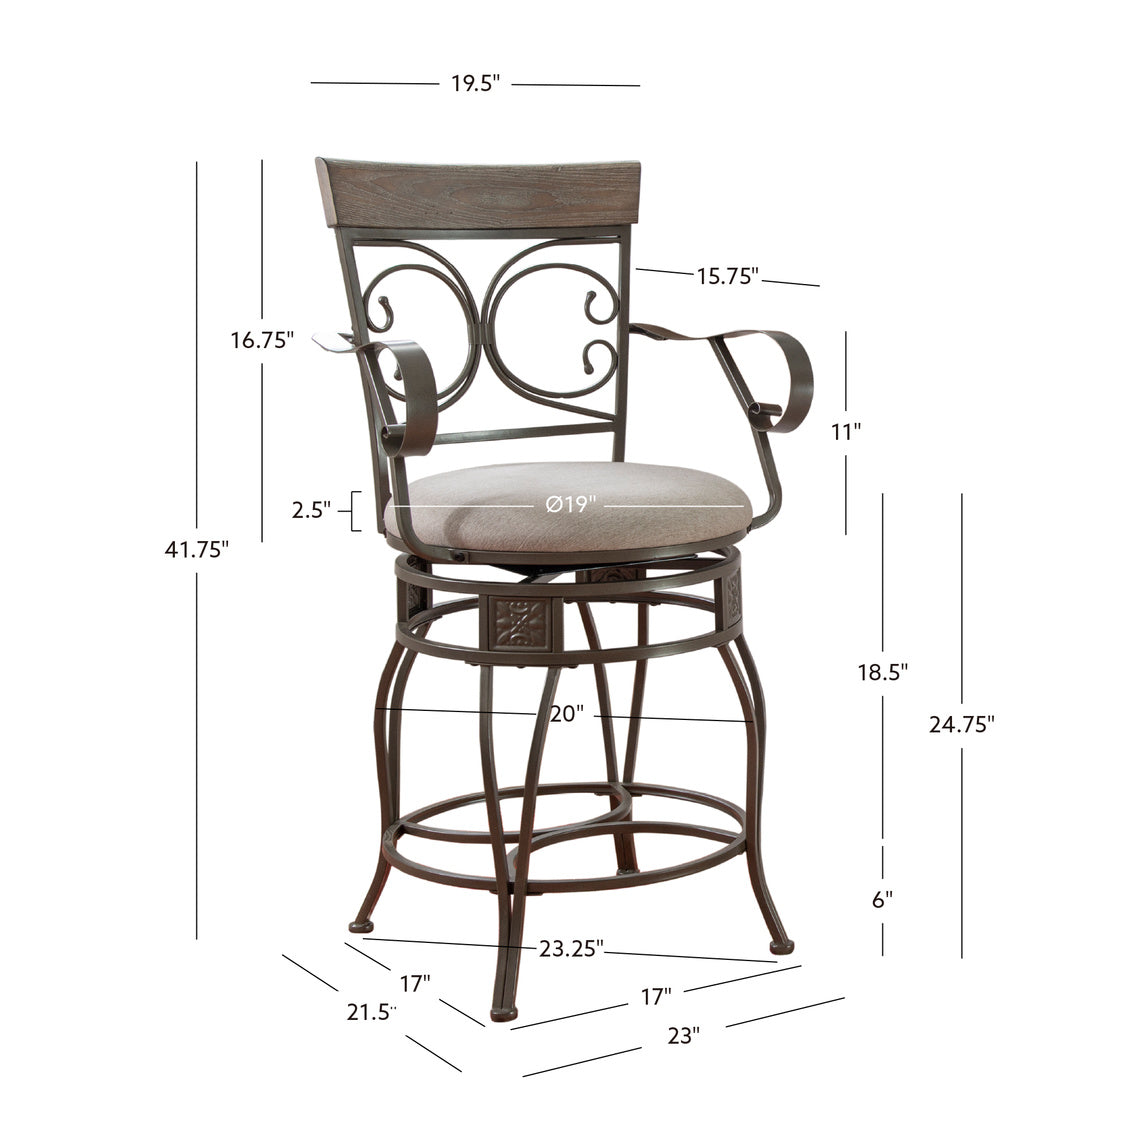 Brea Pewter Swivel Metal Counter Stool with Arms